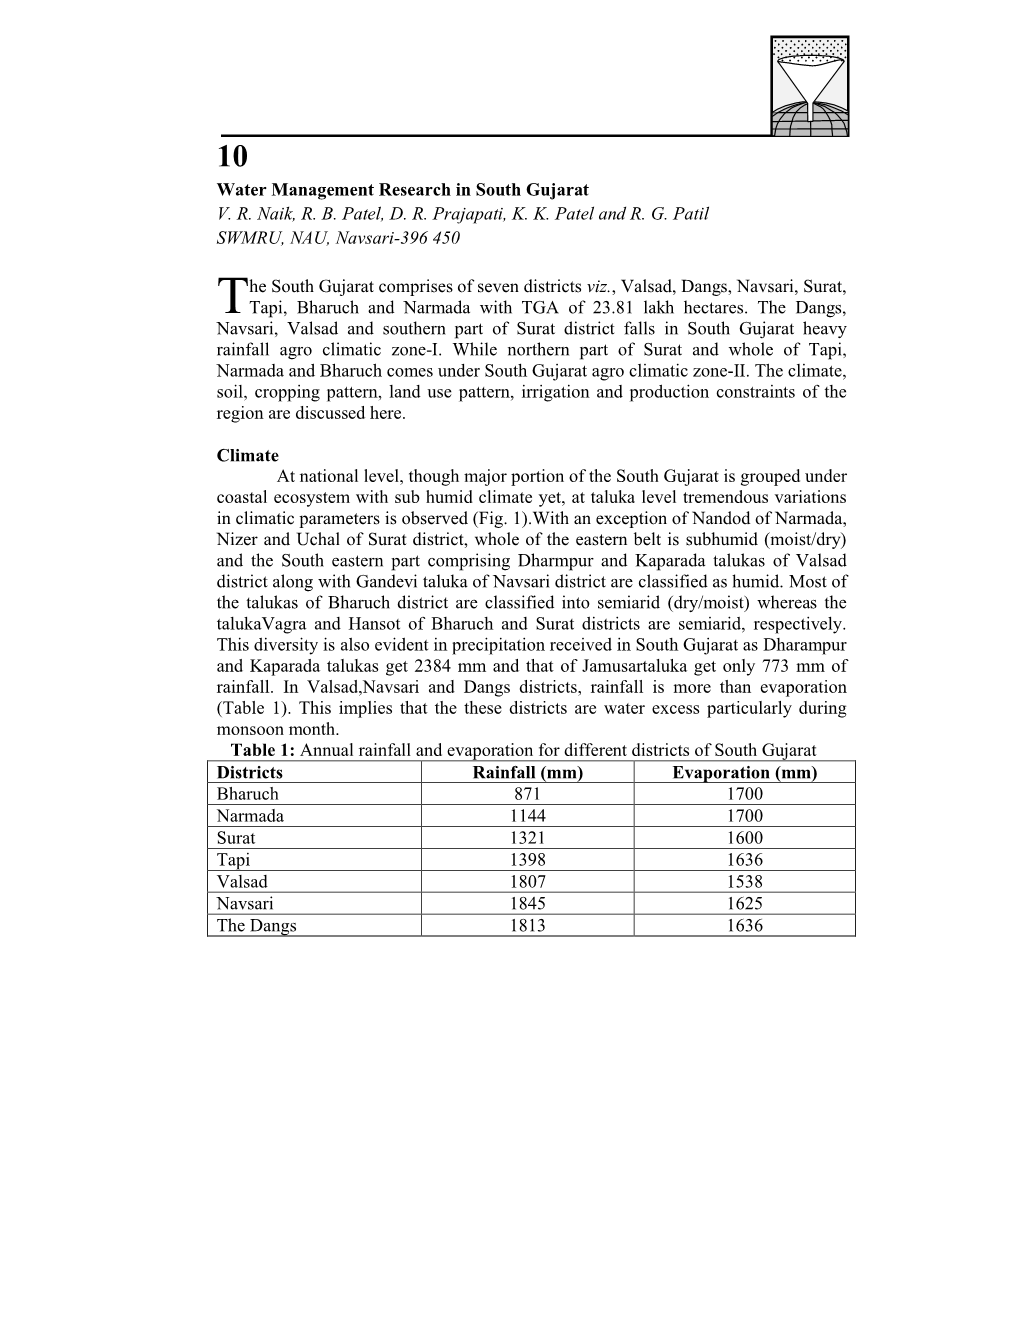 Water Management Research in South Gujarat V. R. Naik, R. B. Patel, D